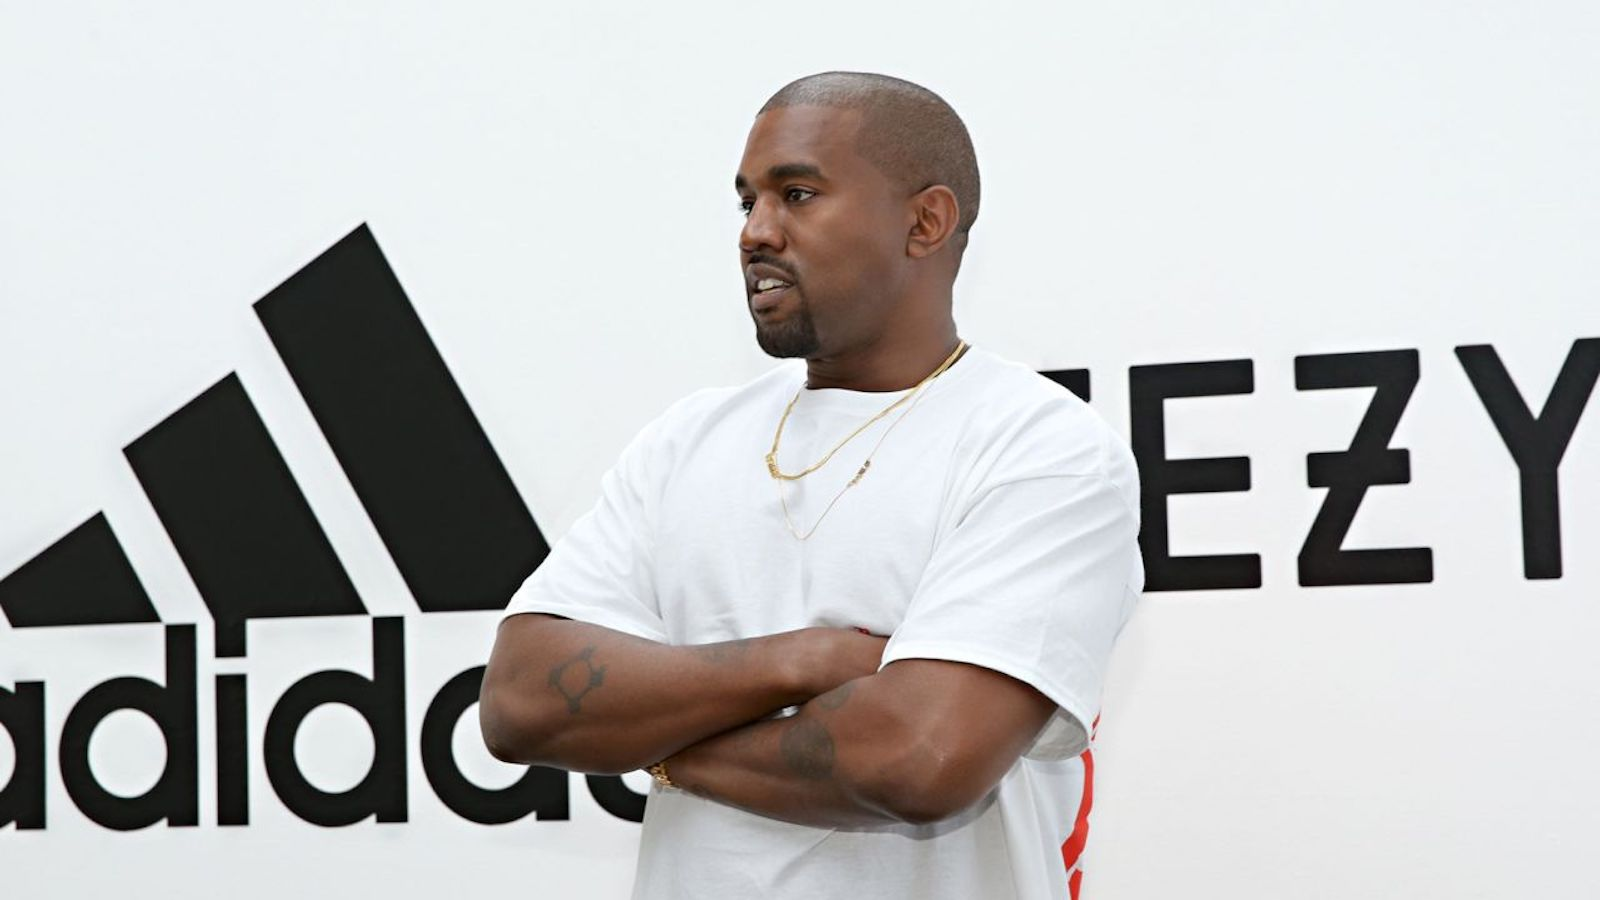 Kanye West is associated with Adidas desde 2013 (Credit: Jonathan Leibson/Getty Images for Adidas)